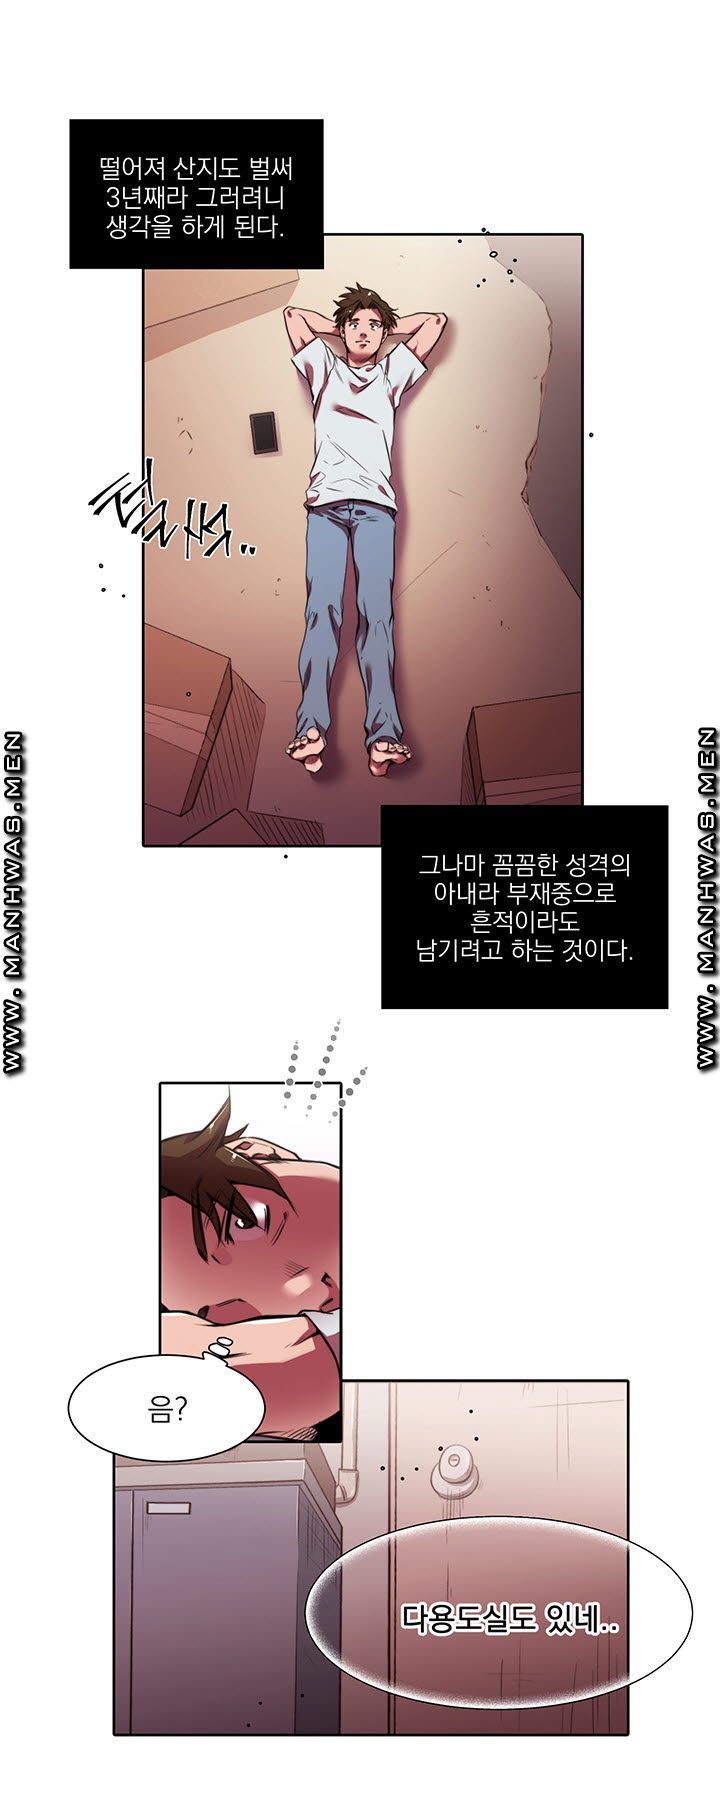 Empty Place Raw - Chapter 1 Page 4